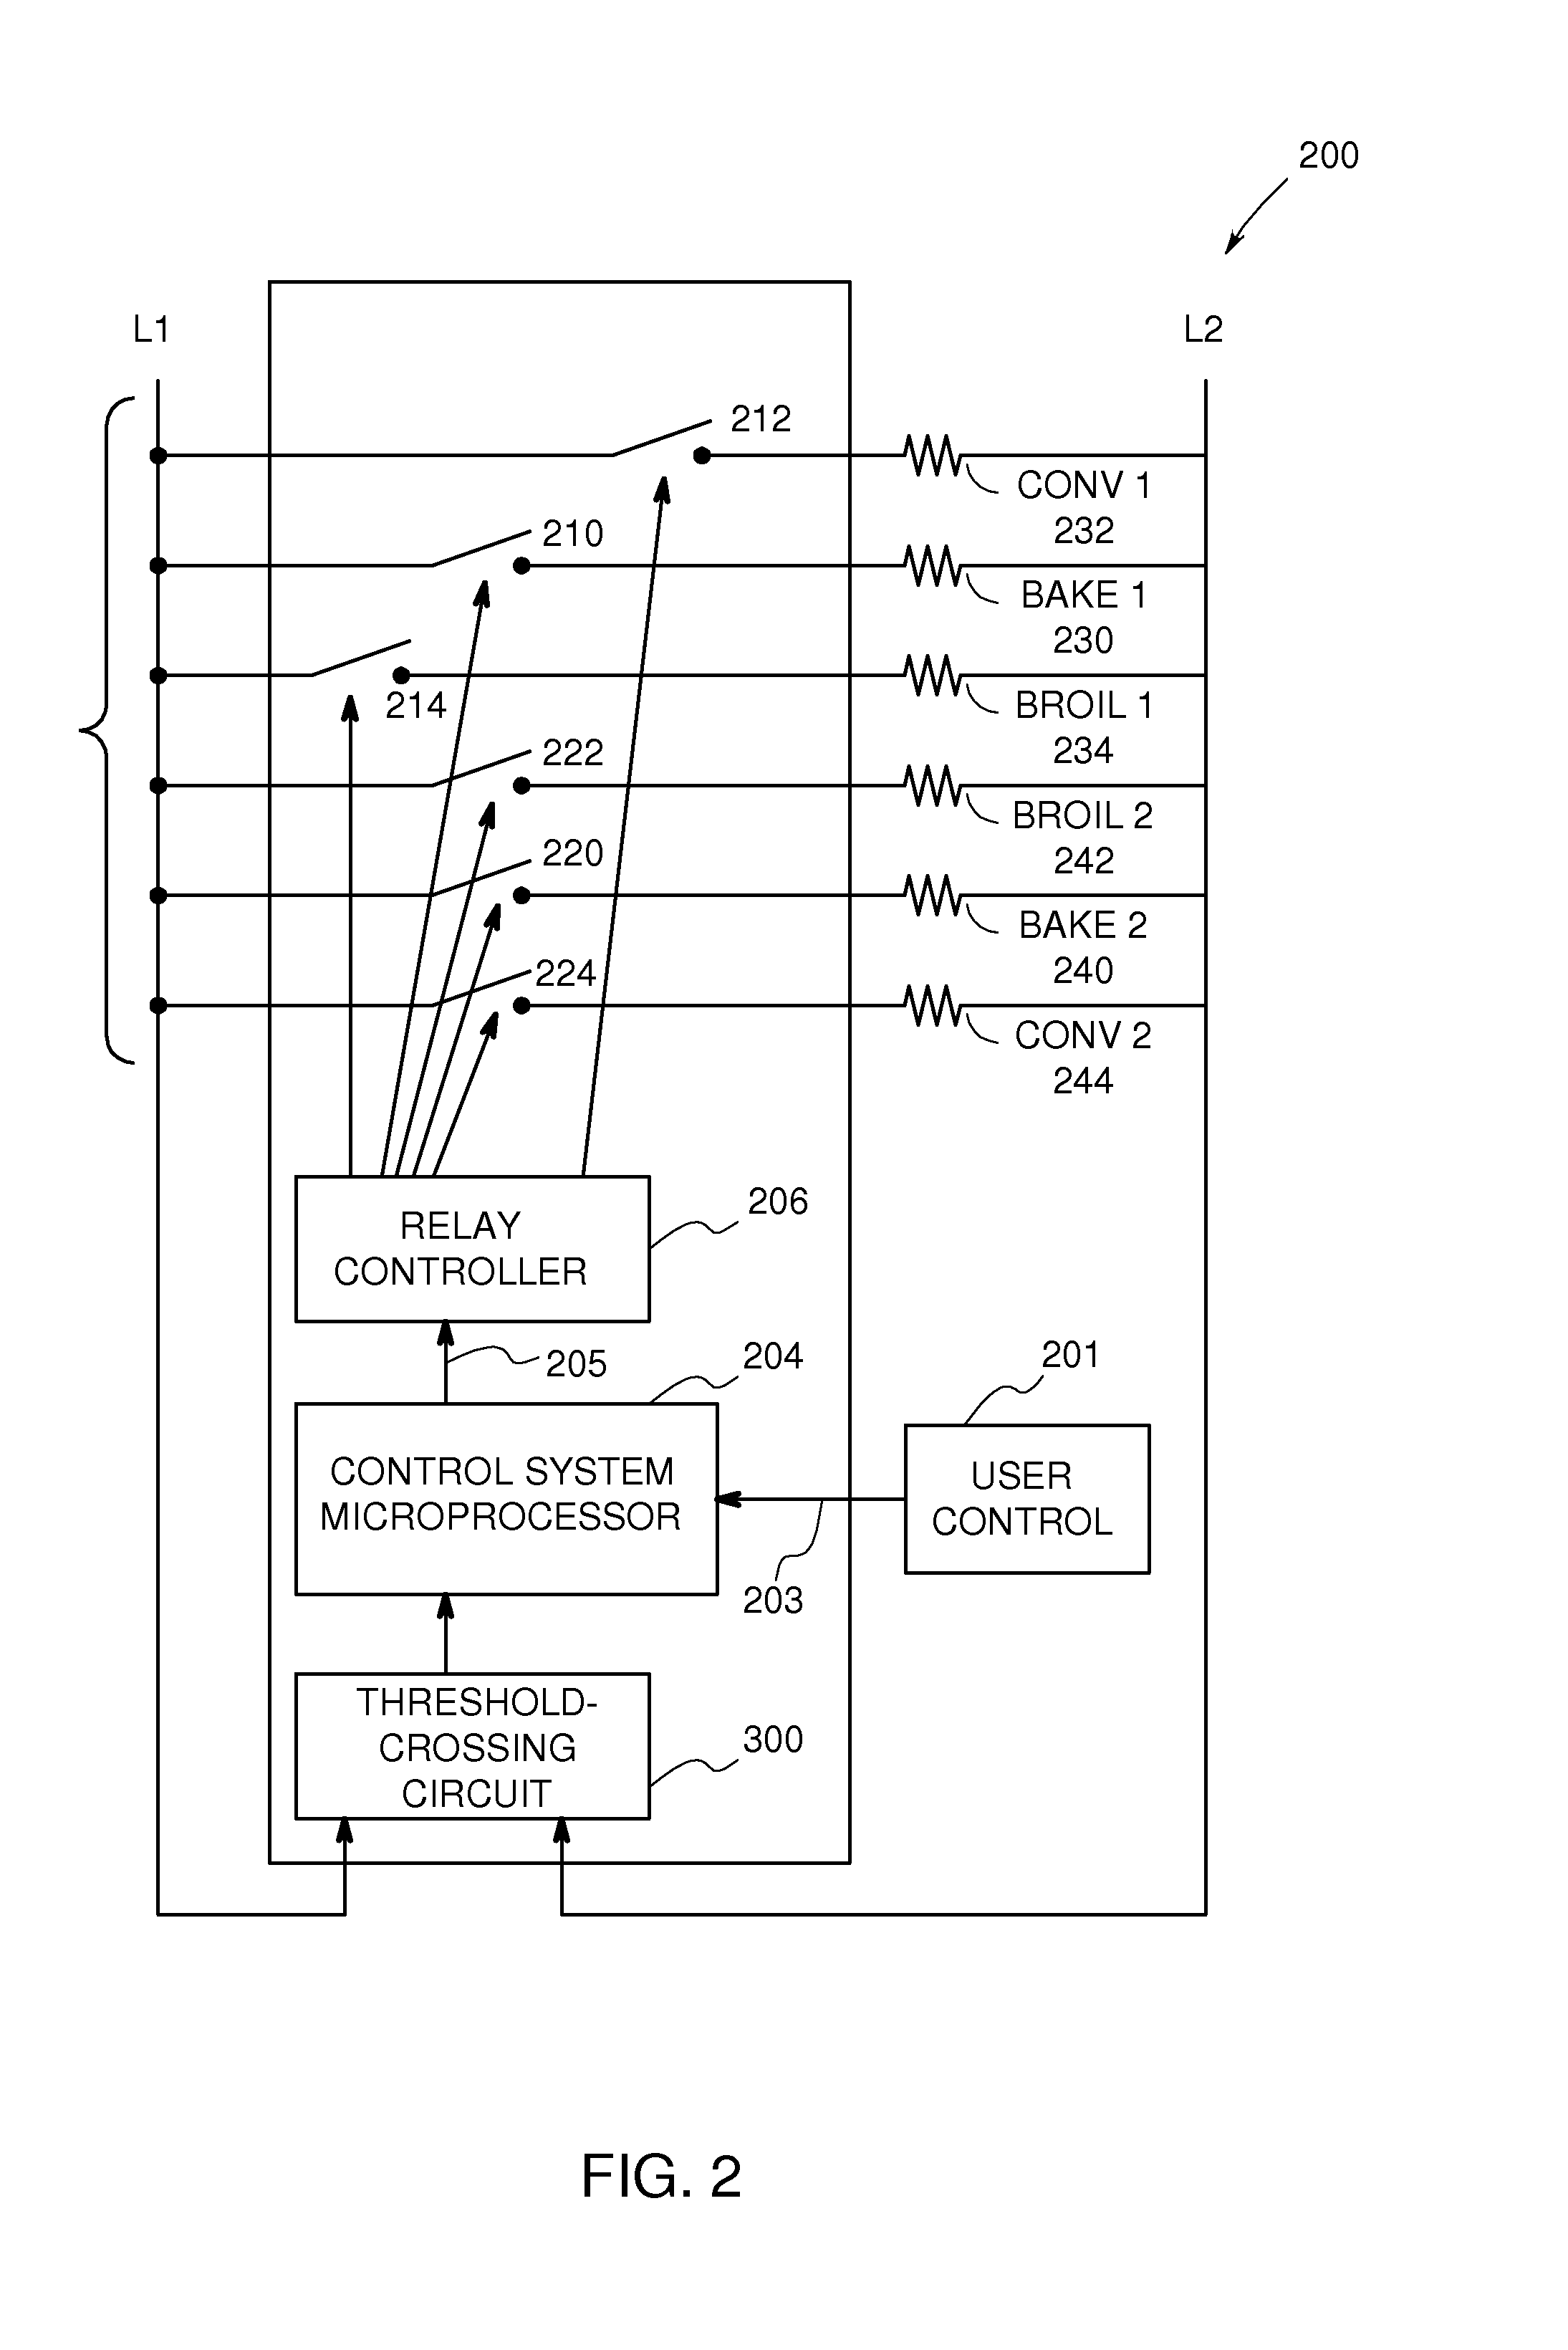 Control system for an appliance